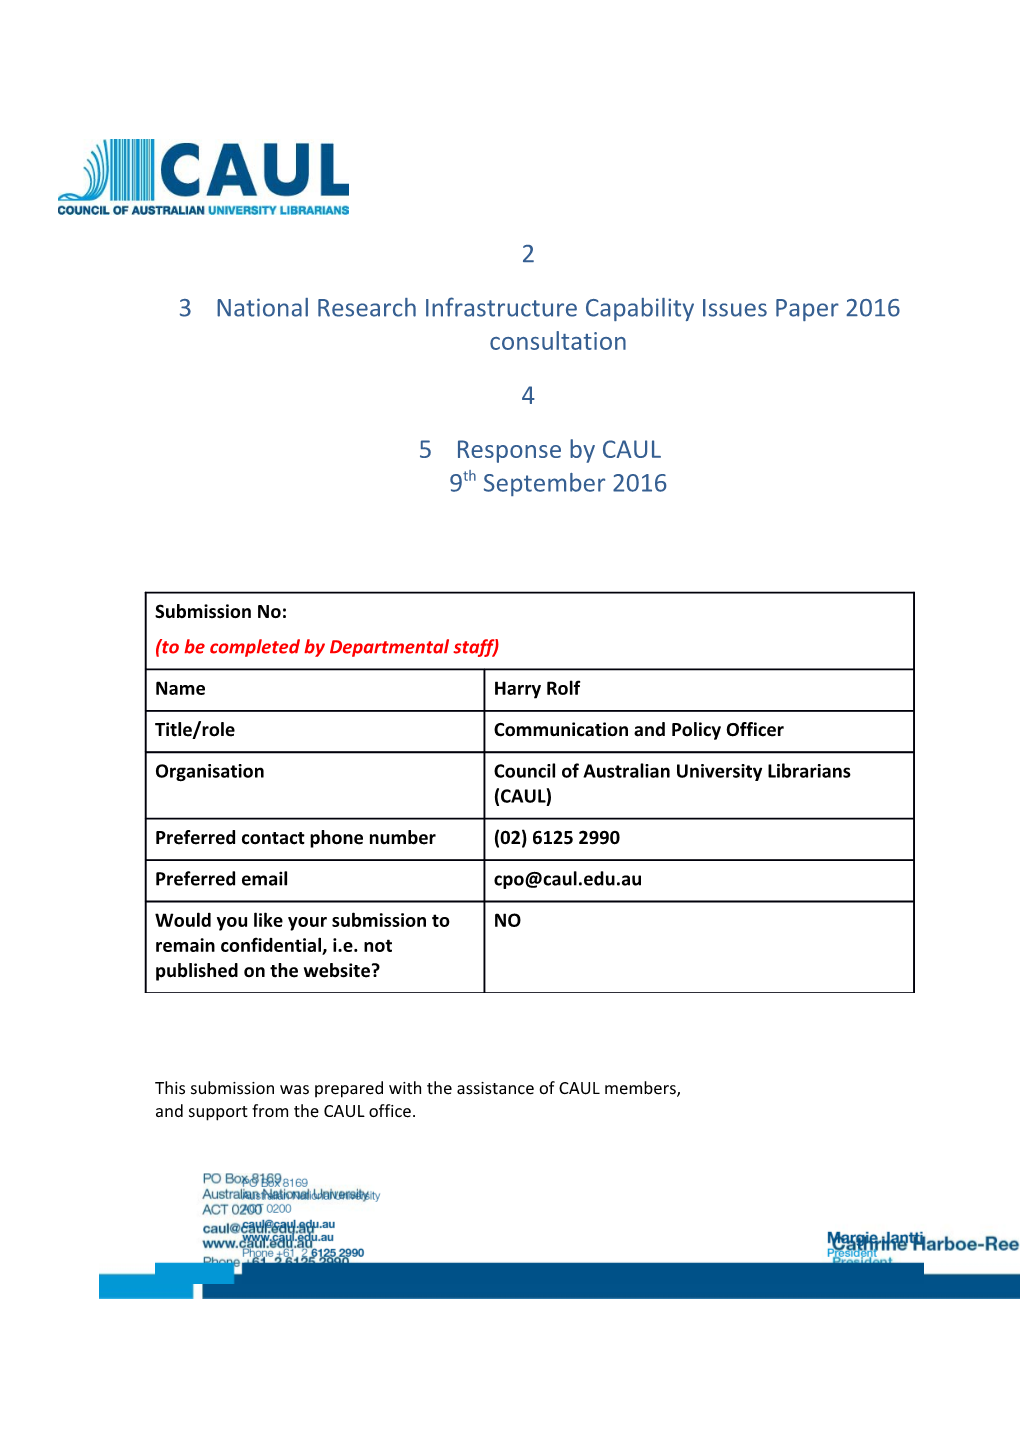 National Research Infrastructure Capabilityissues Paper 2016Consultation